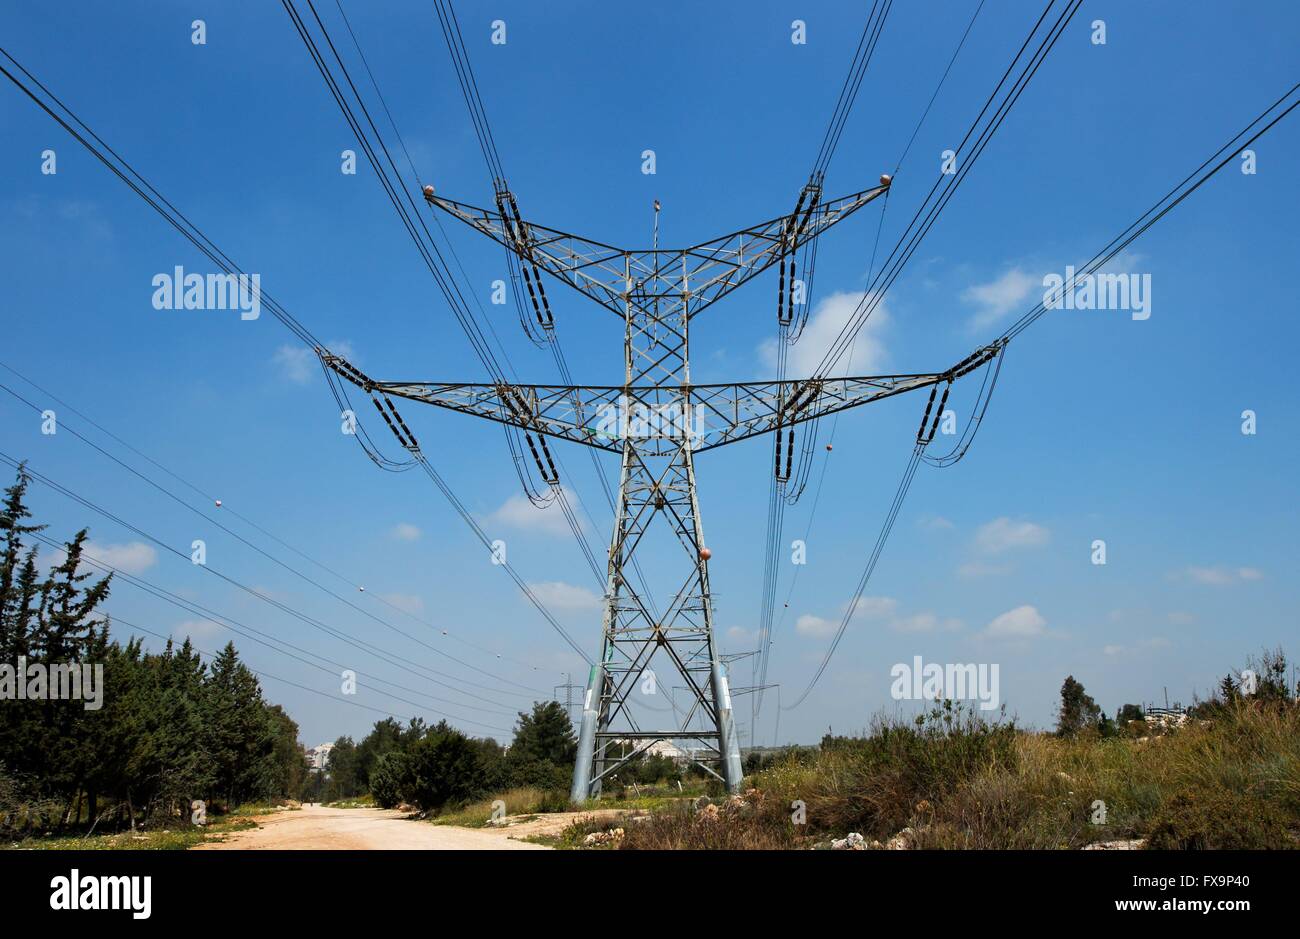 Two-tiered steel support of overhead power transmission line Stock Photo